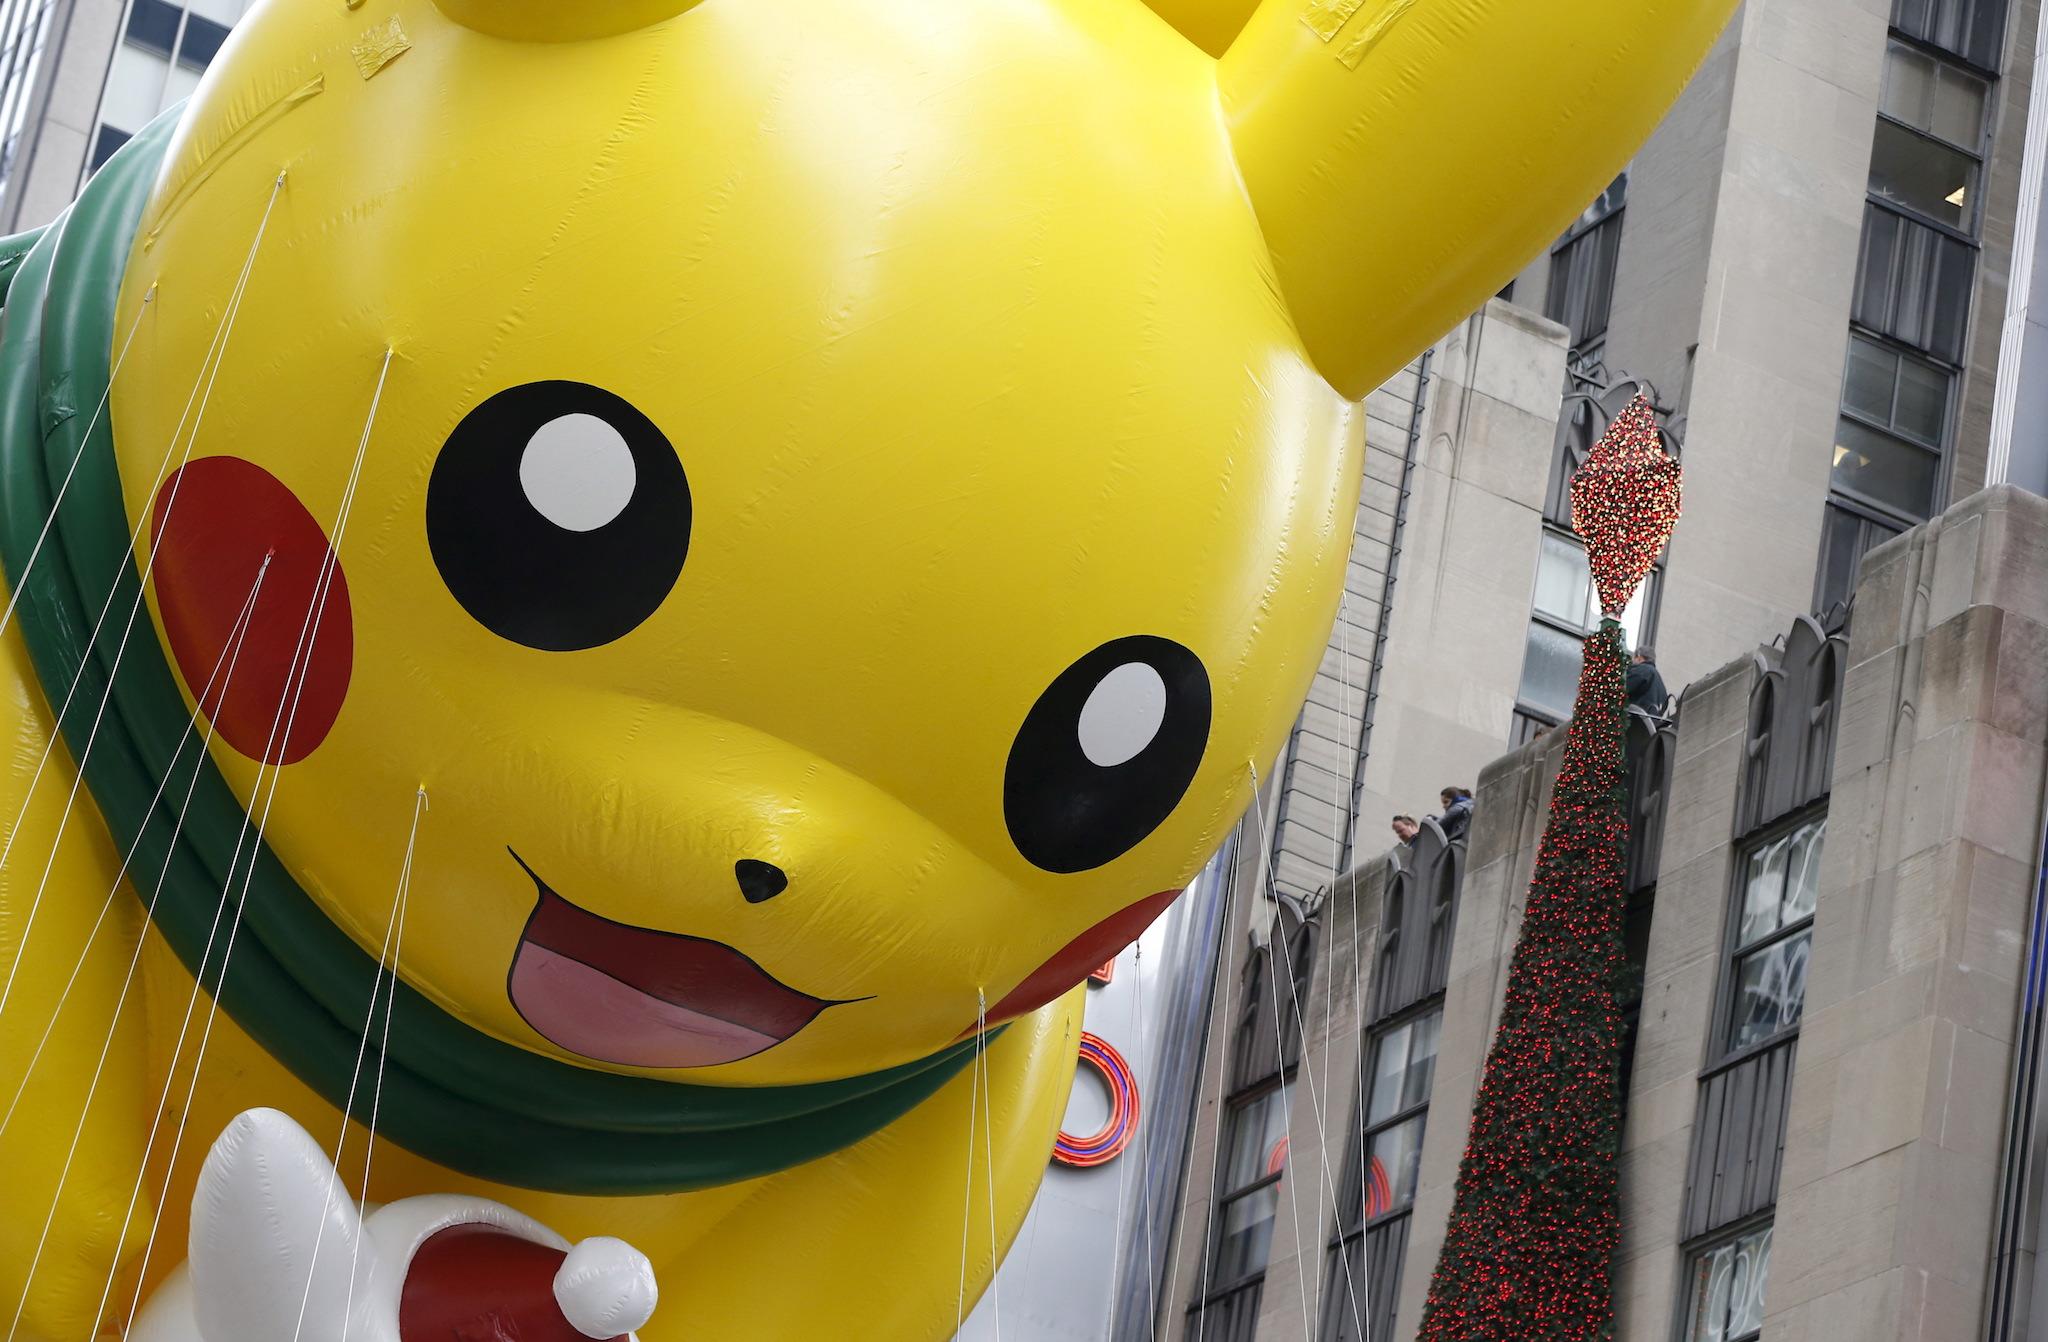 The Pokemon "Pikachu" float makes its way down 6th avenue during the 89th Macy's Thanksgiving Day Parade in Manhattan